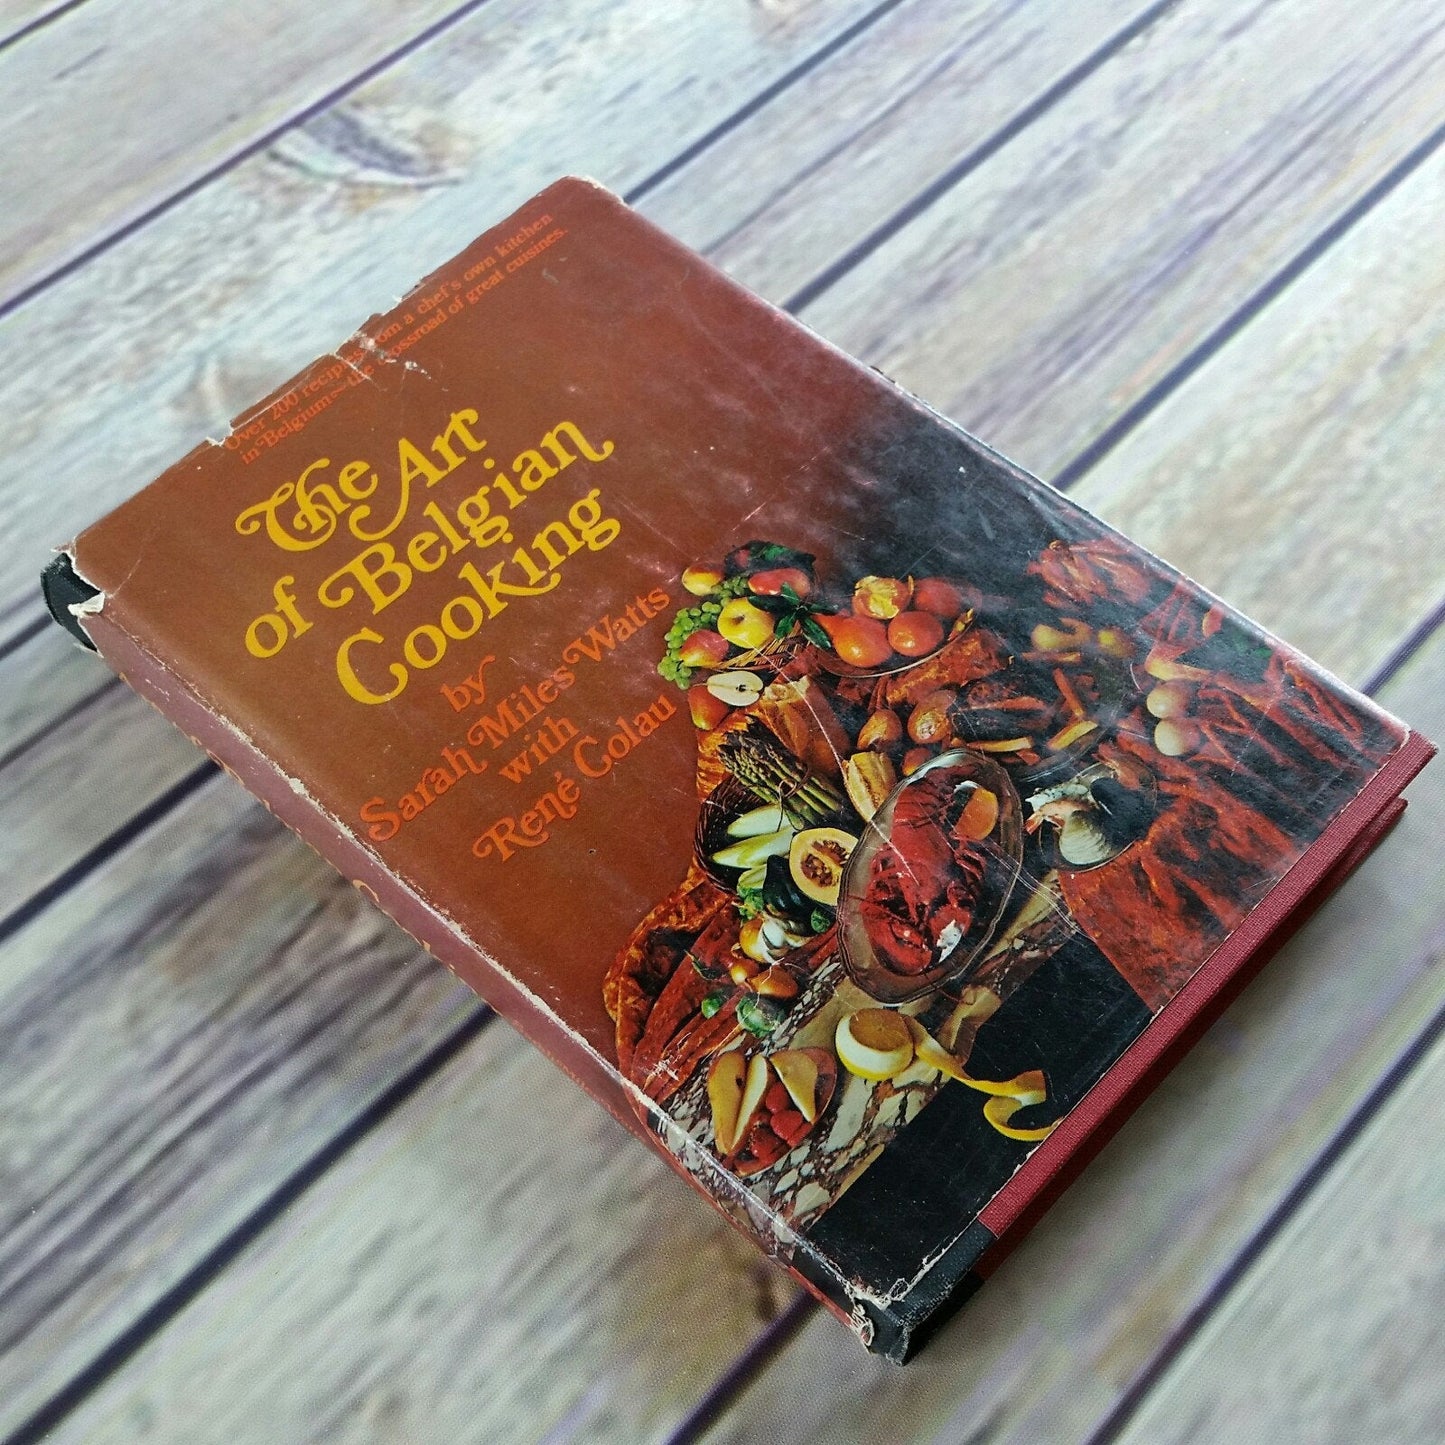 Vintage Belgian Cookbook The Art Of Belgian Cooking Recipes Sarah Watts 1971 First Edition Hardcover Dust Jacket